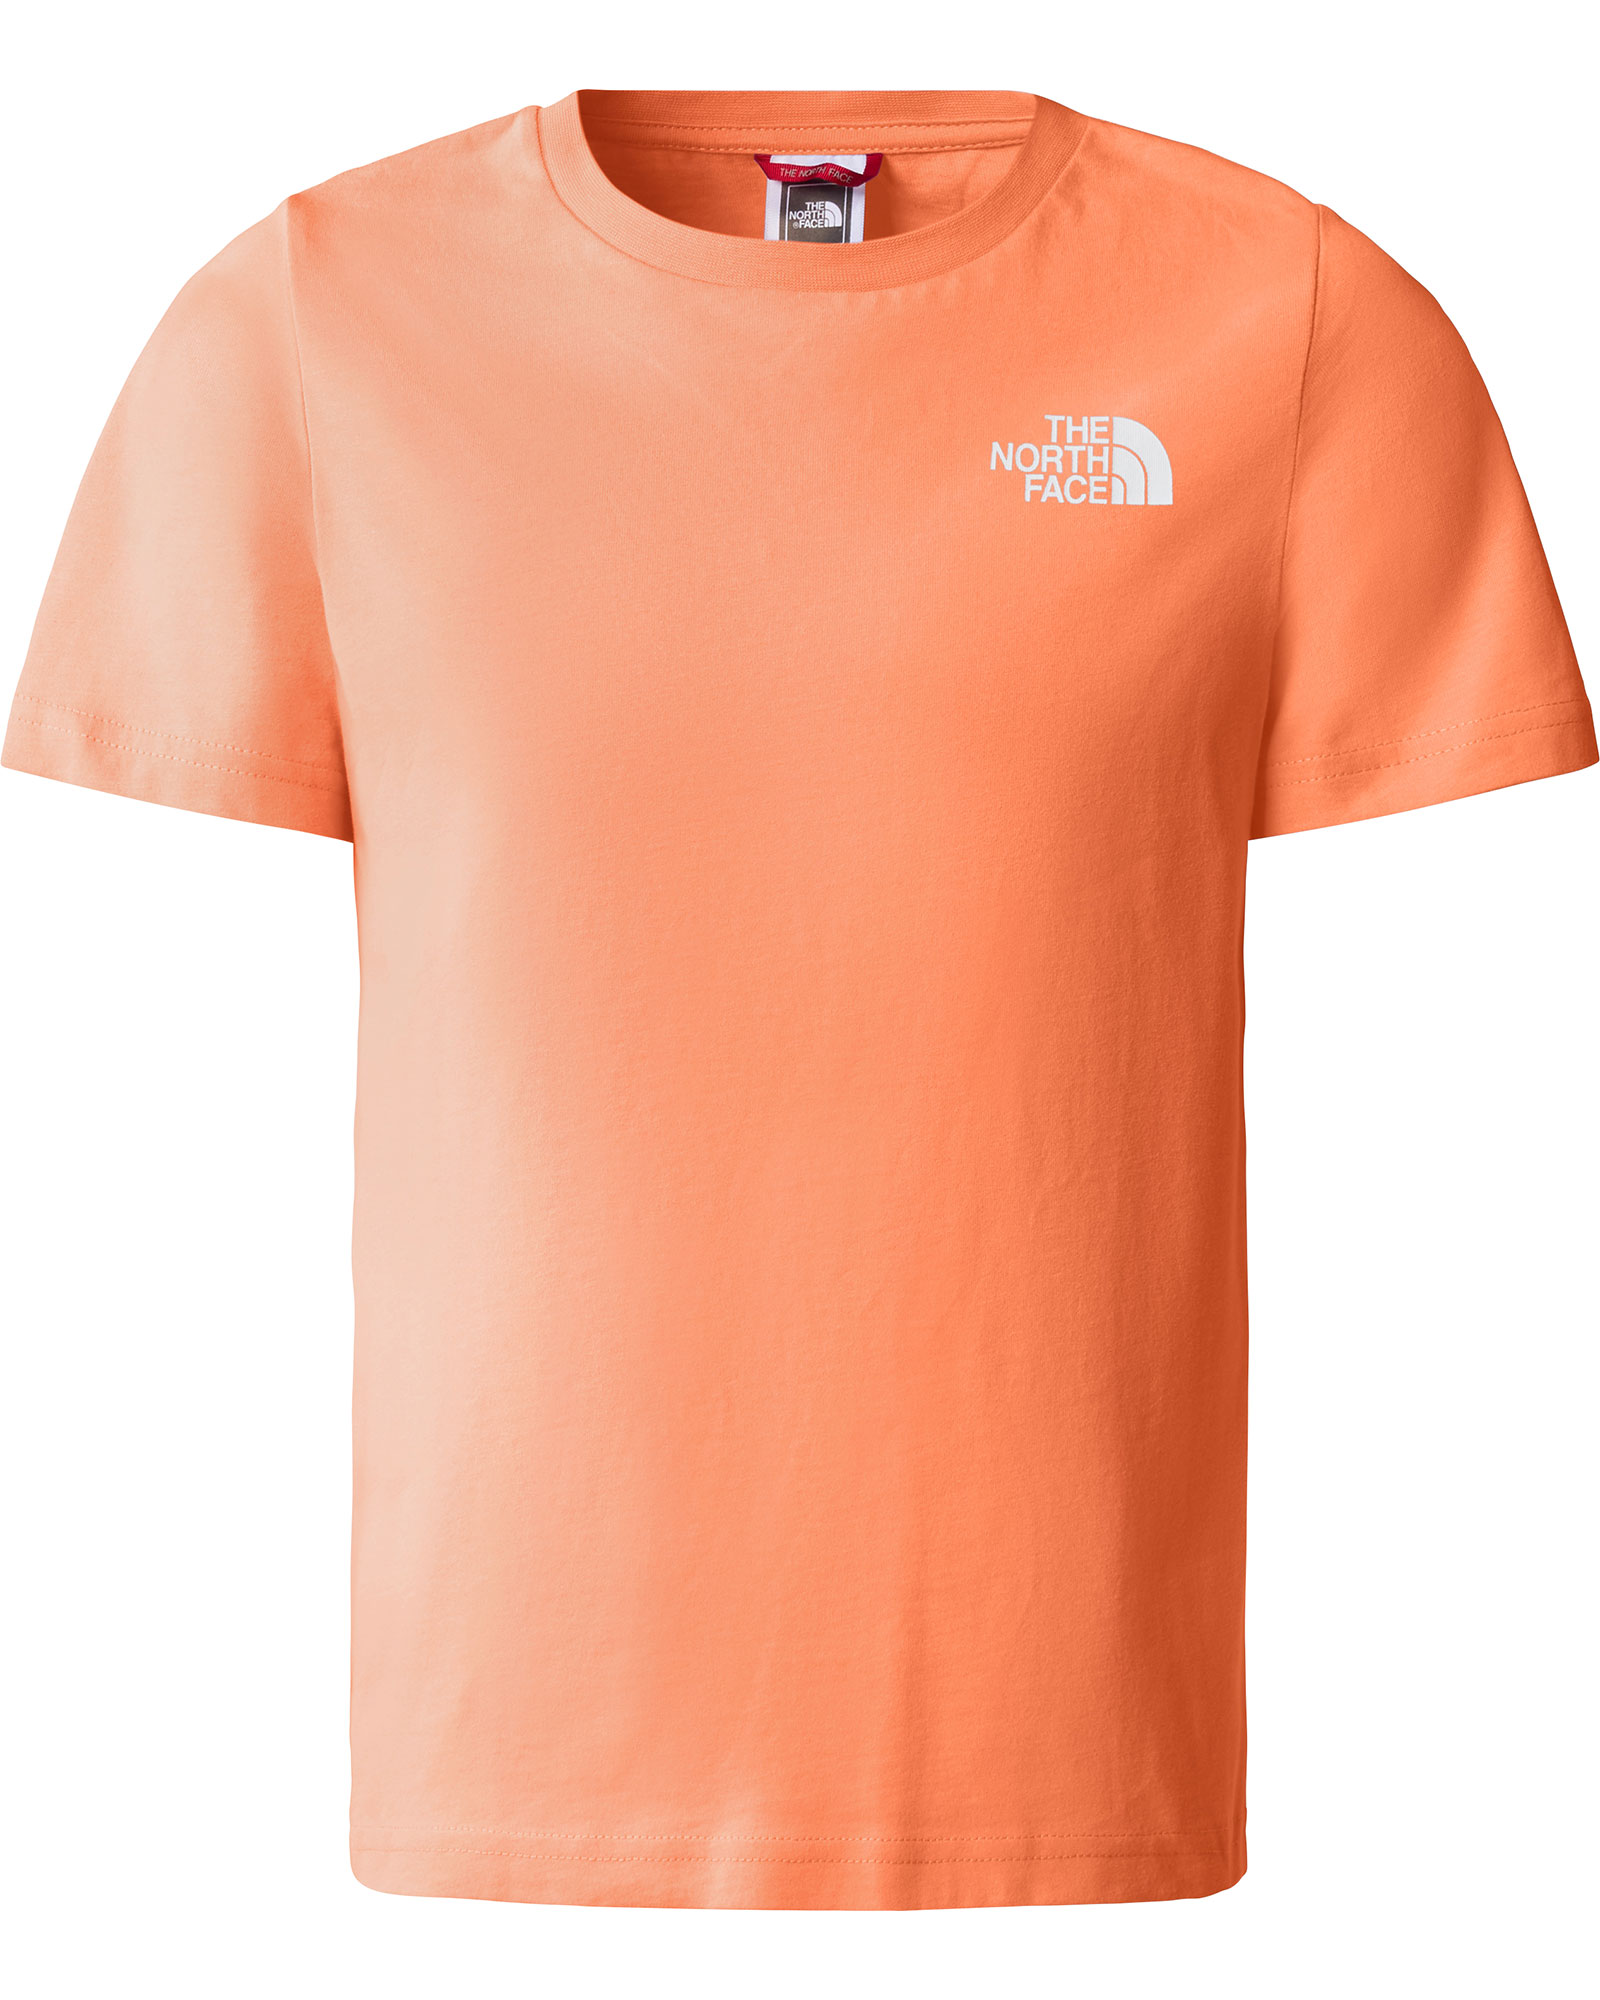 The North Face Girl’s Relaxed Redbox T Shirt - Dusty Coral Orange S